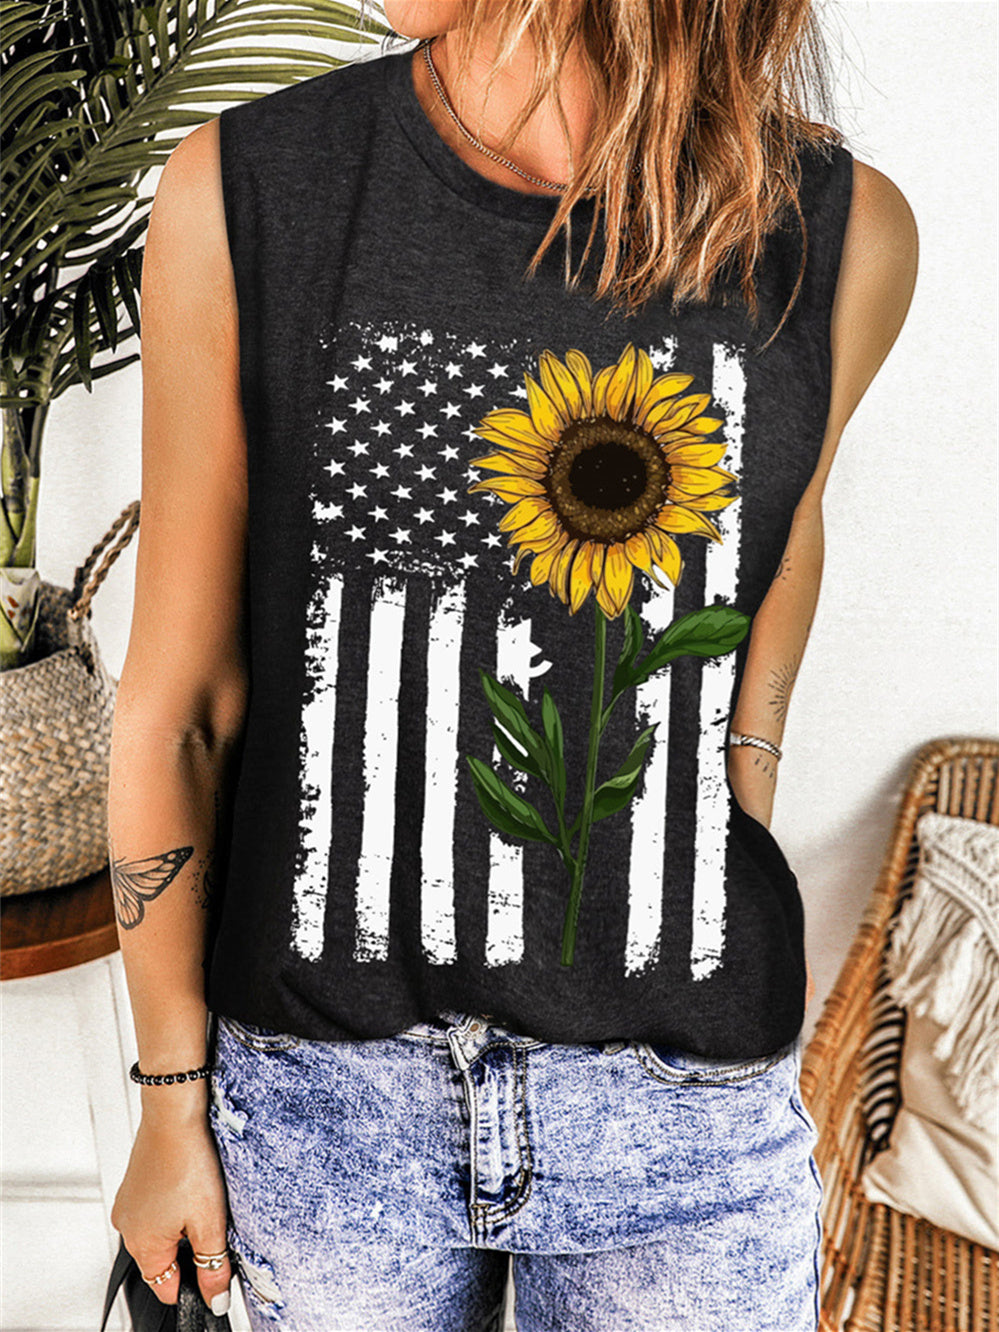 Sunflowers and American Flag Undershirts